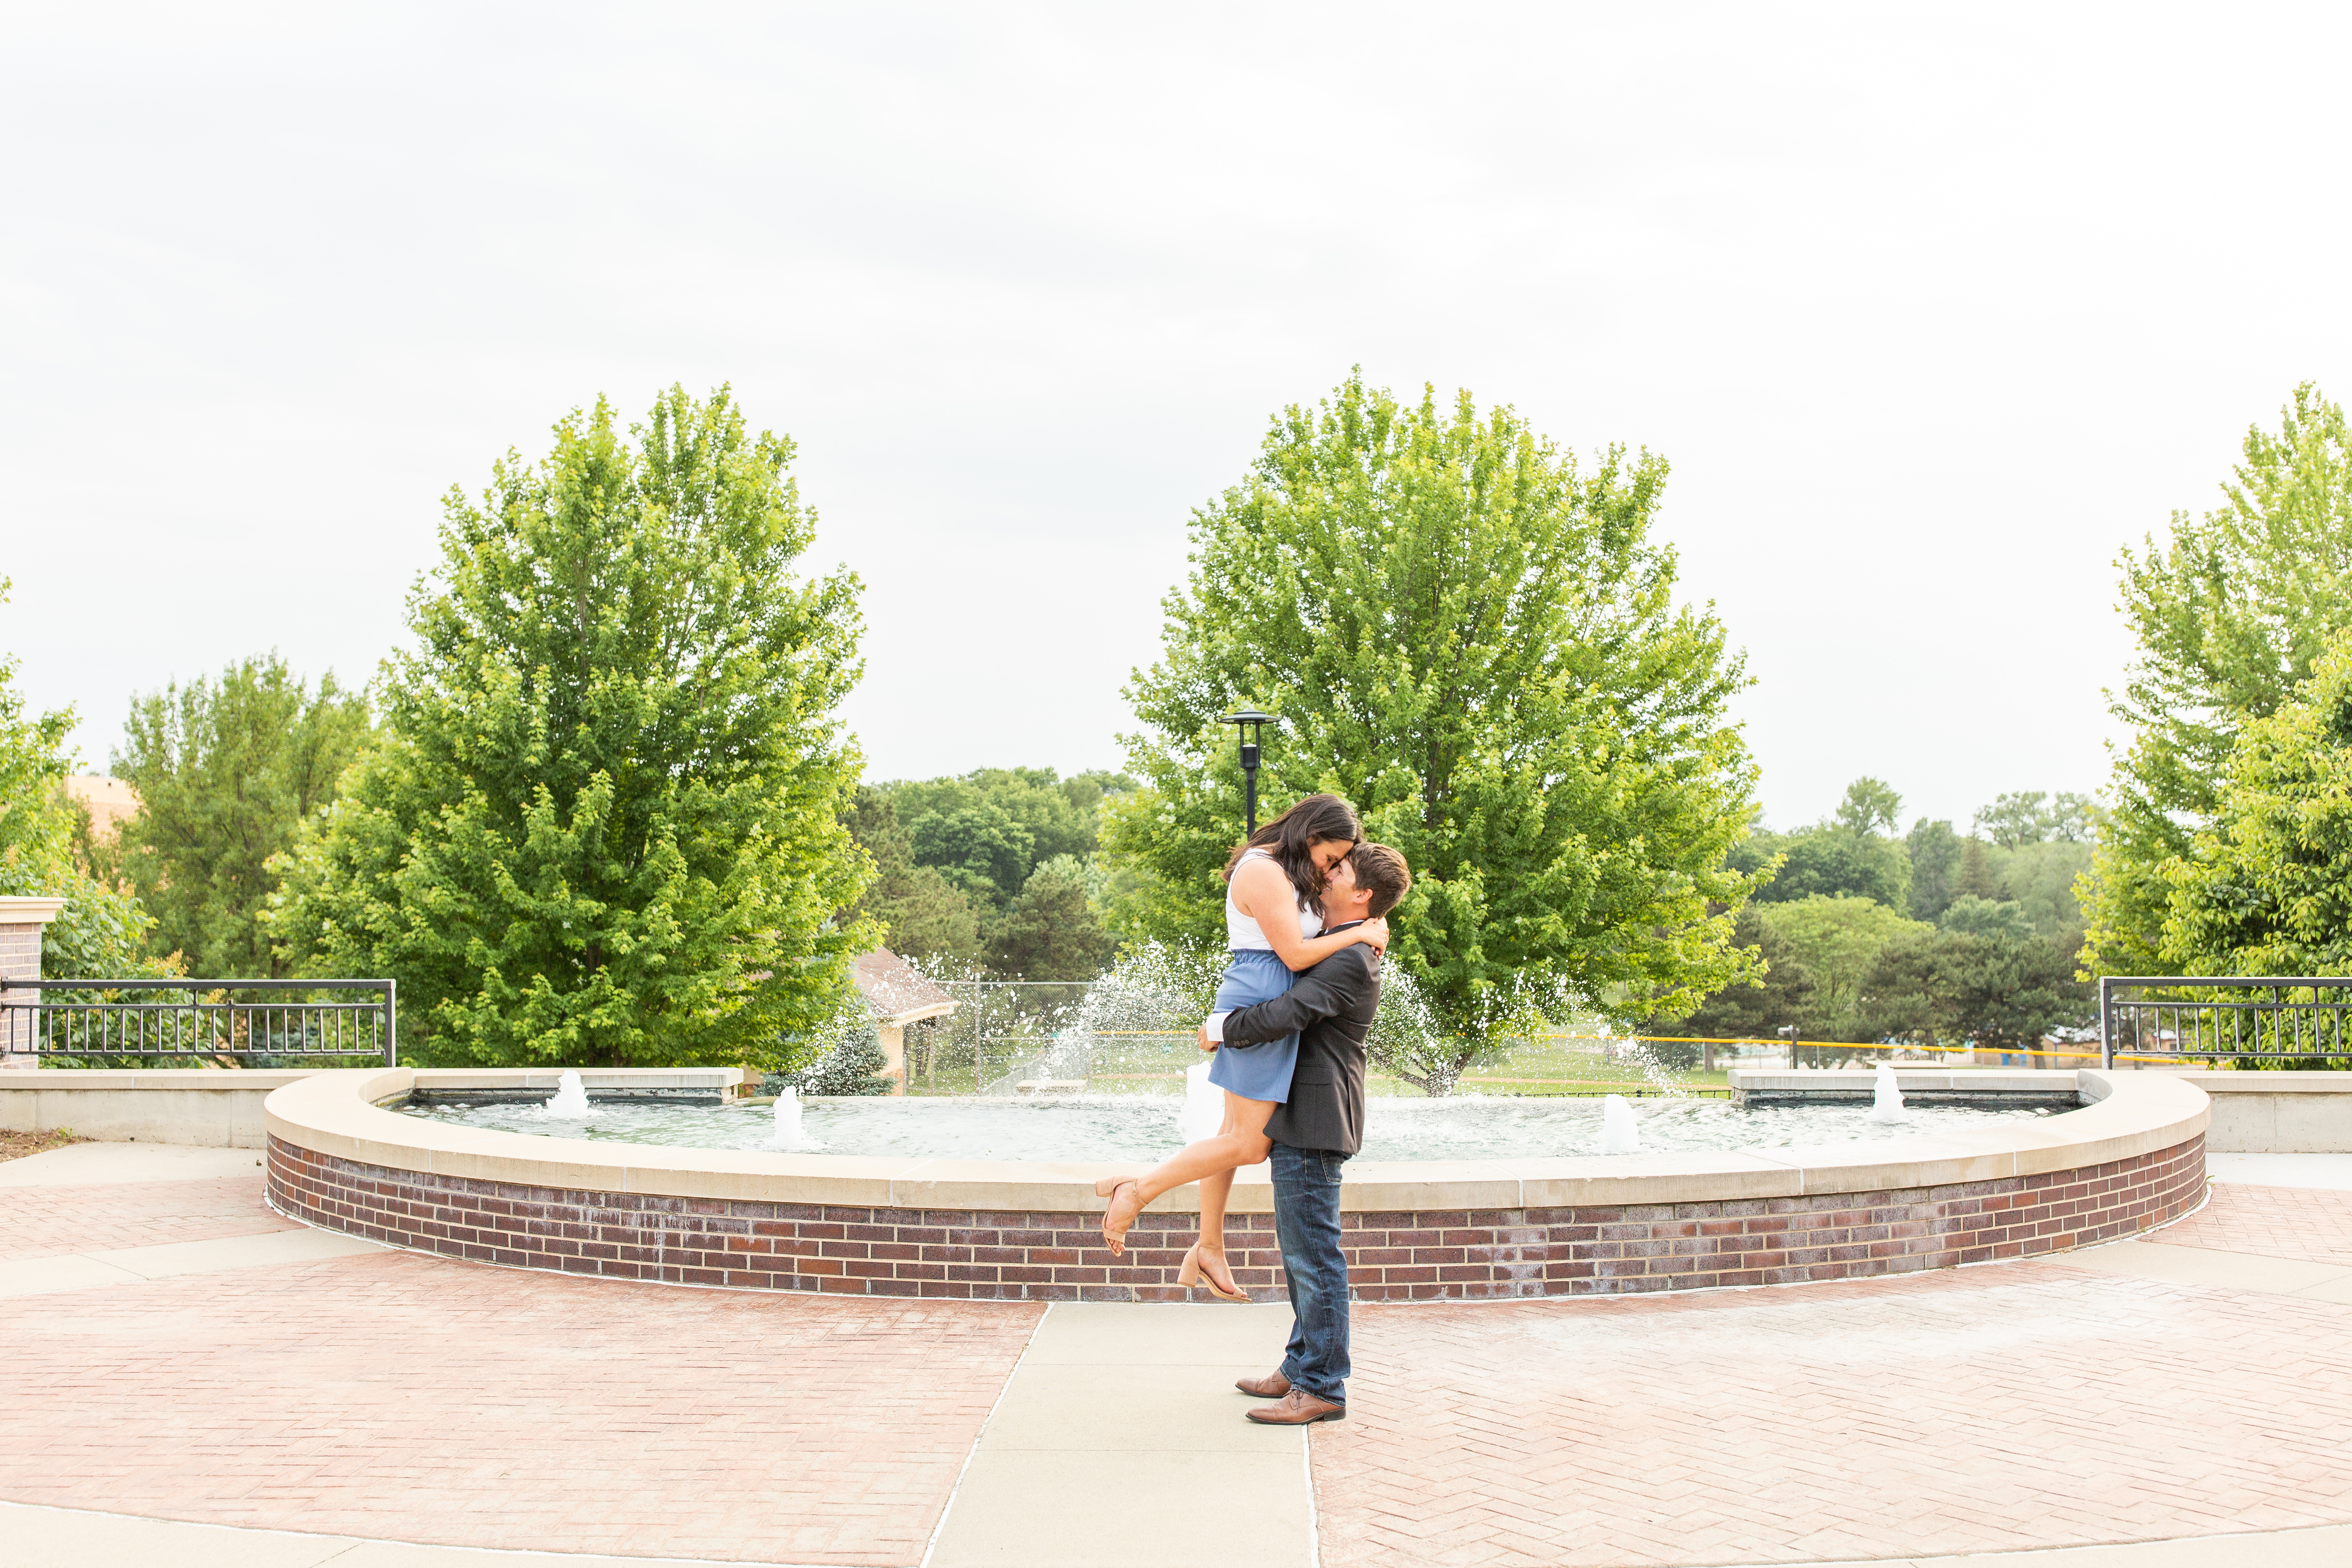 Romantic Engagement Photos on University Campus | Engagement Portraits in Sioux City, Iowa shot by Jessica Brees Photography